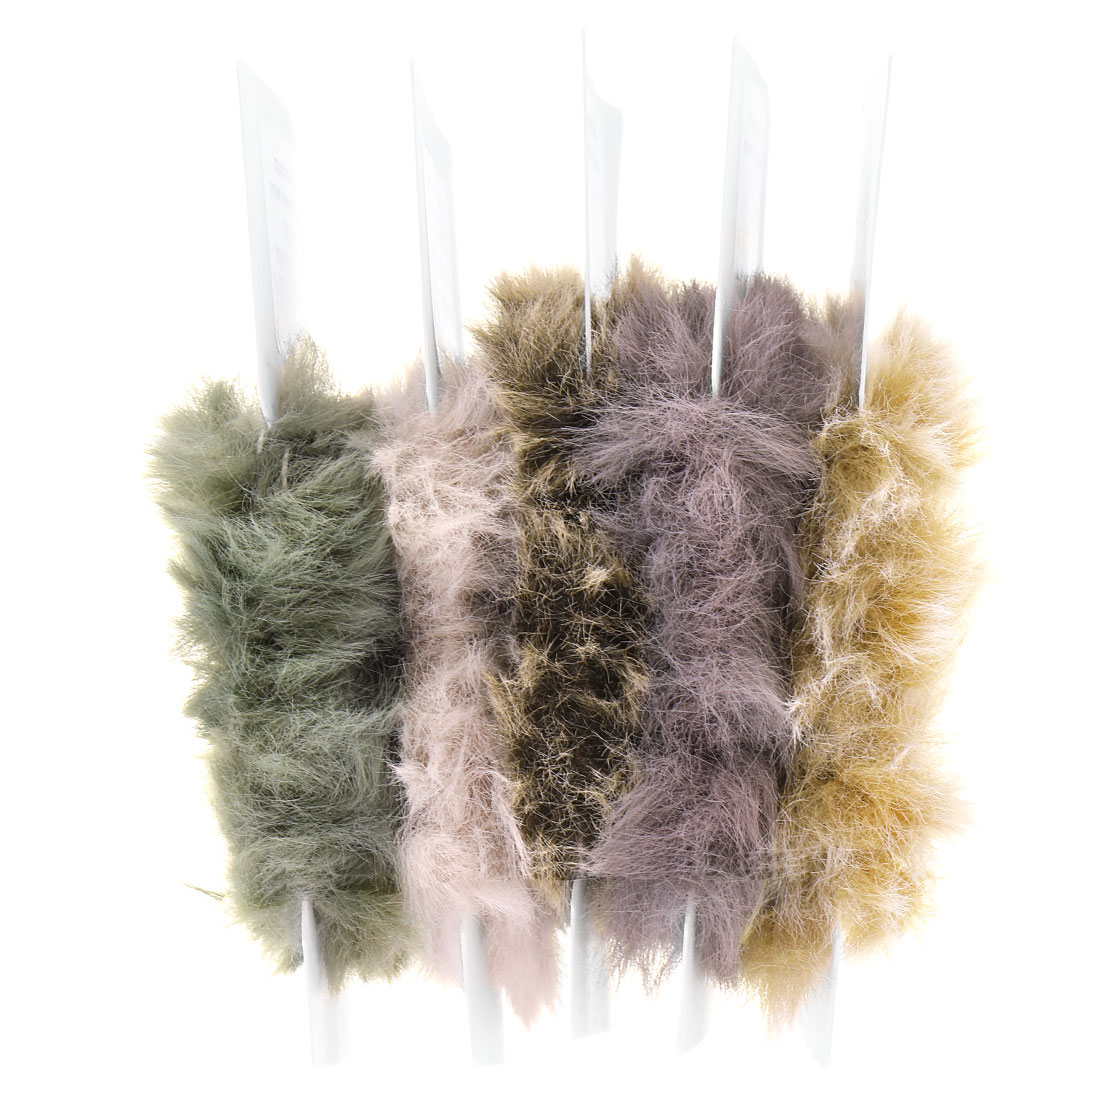 Barred Rabbit Zonker Strips Fly Tying Materials 6 COLORS AVAILABLE!